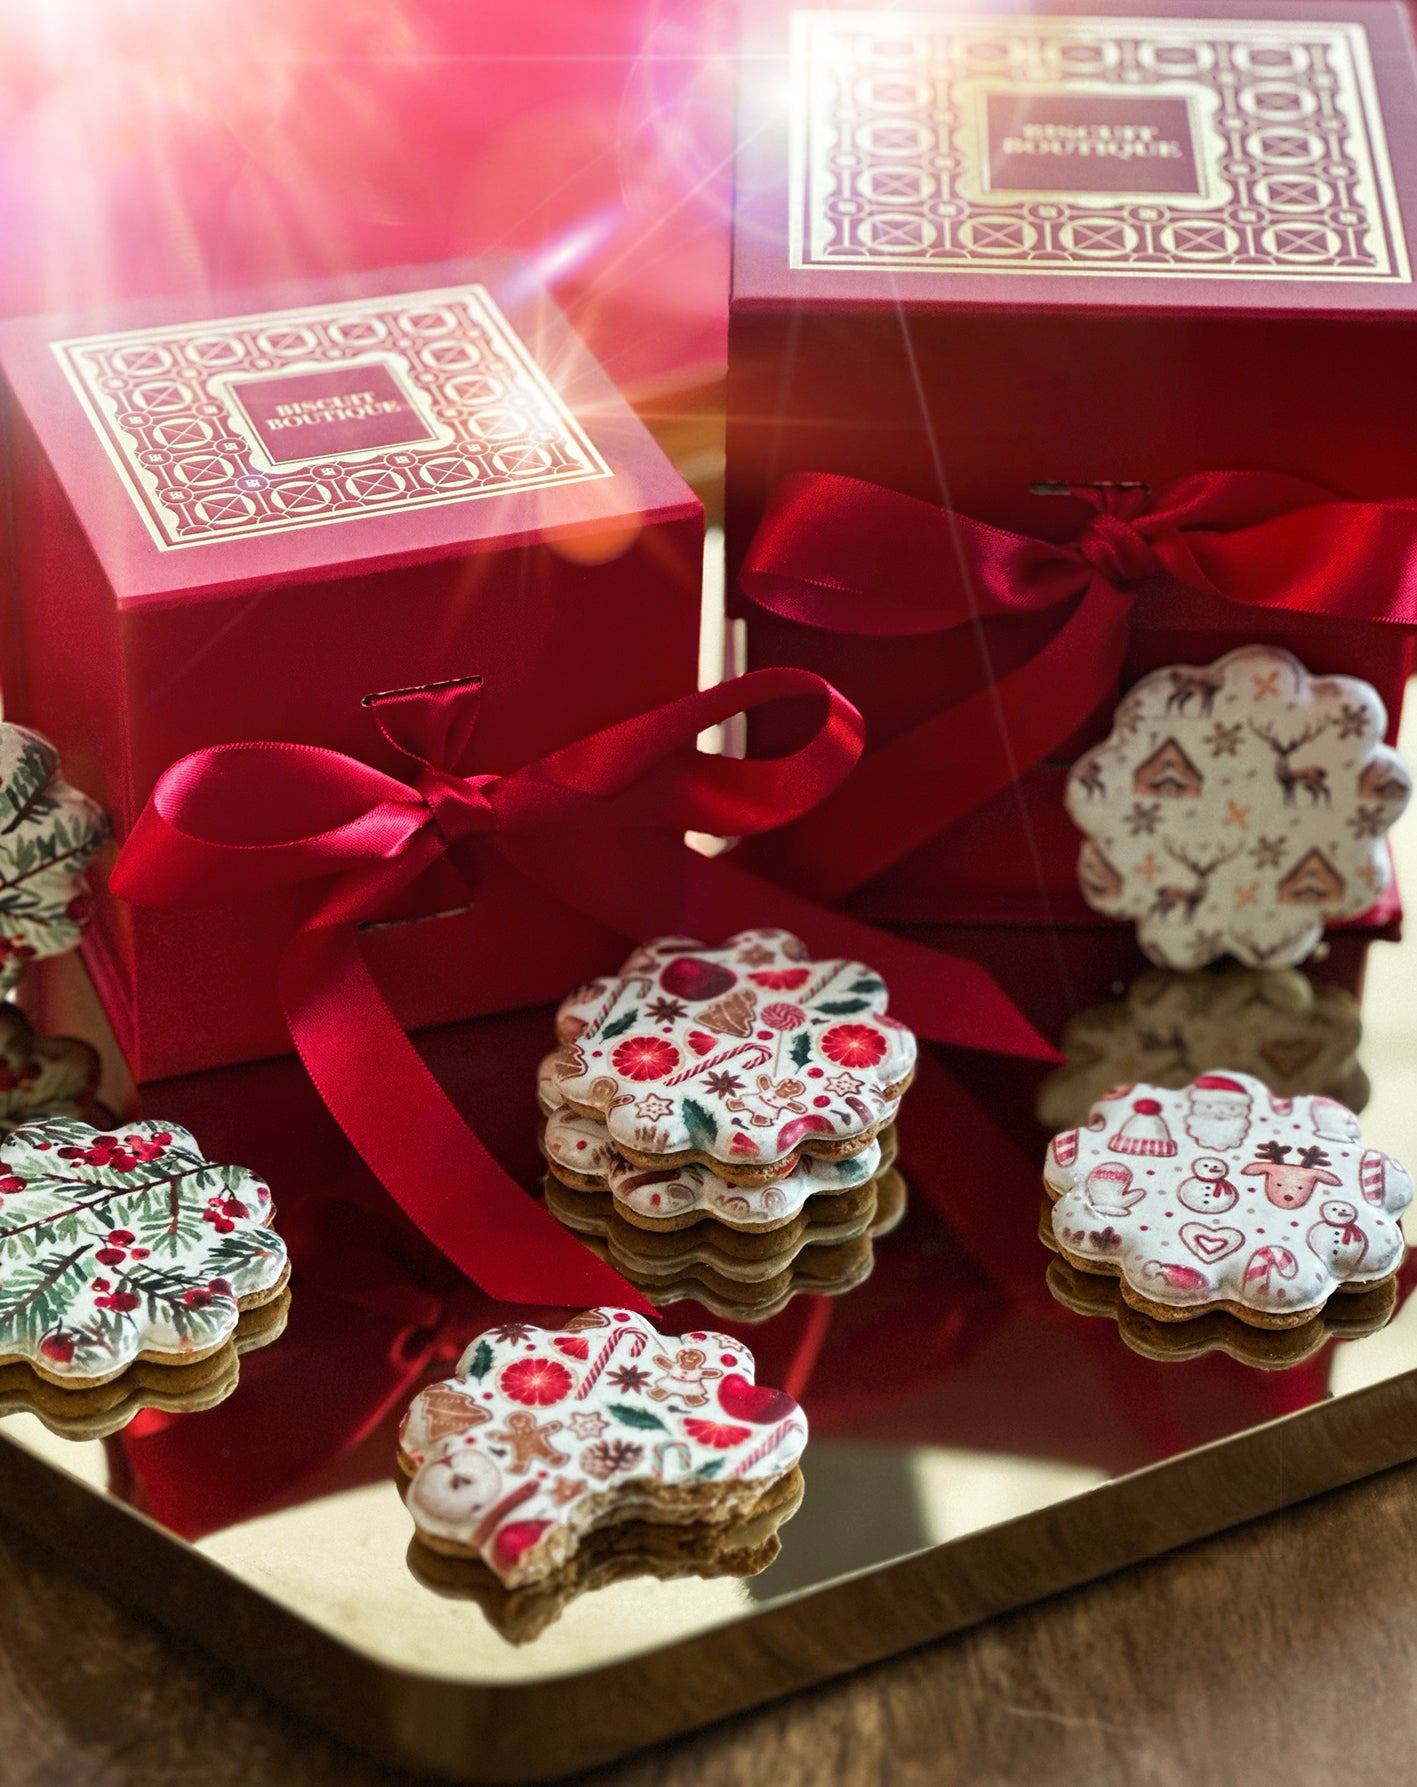 MC15 Winter berries - Speculoos Sandwich Biscuits with a twist